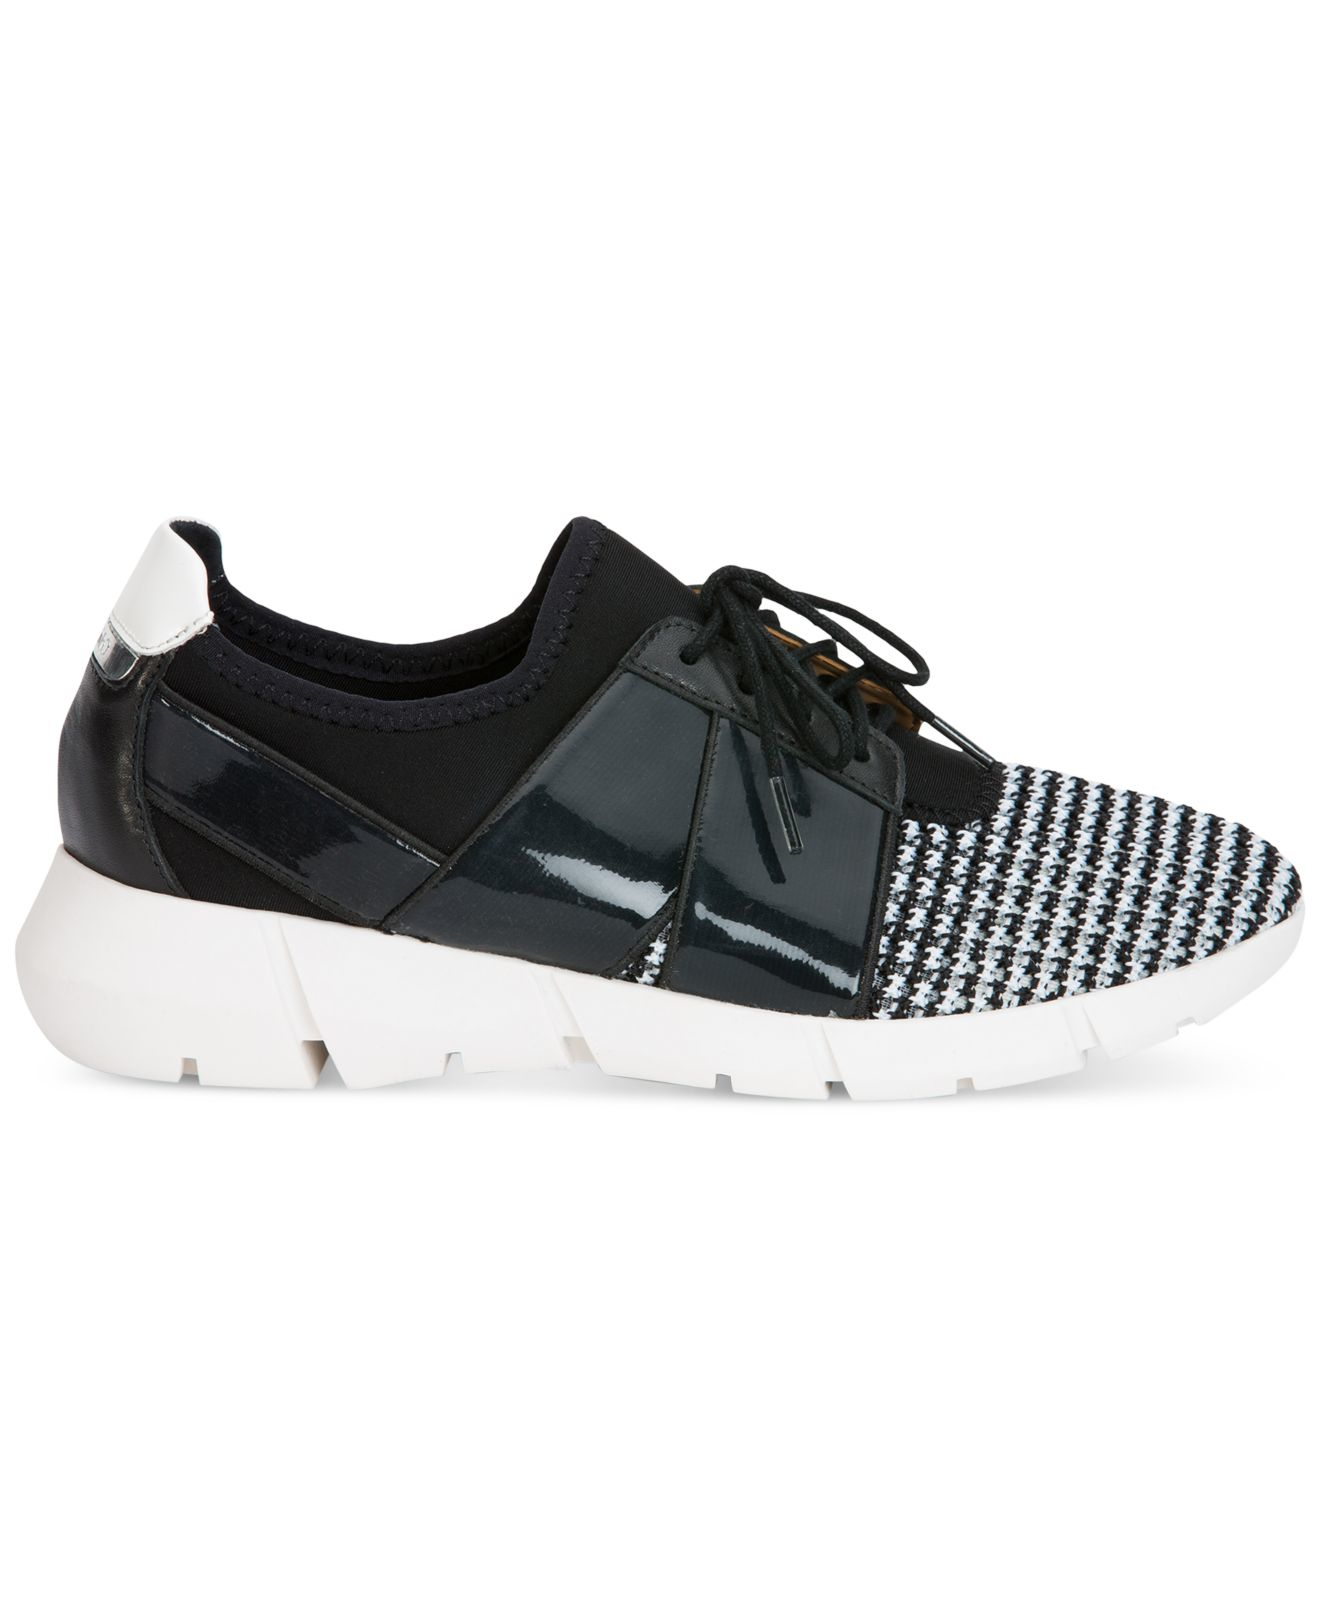 Lyst - Calvin klein Women's Wisteria Lace-up Sneakers in Black